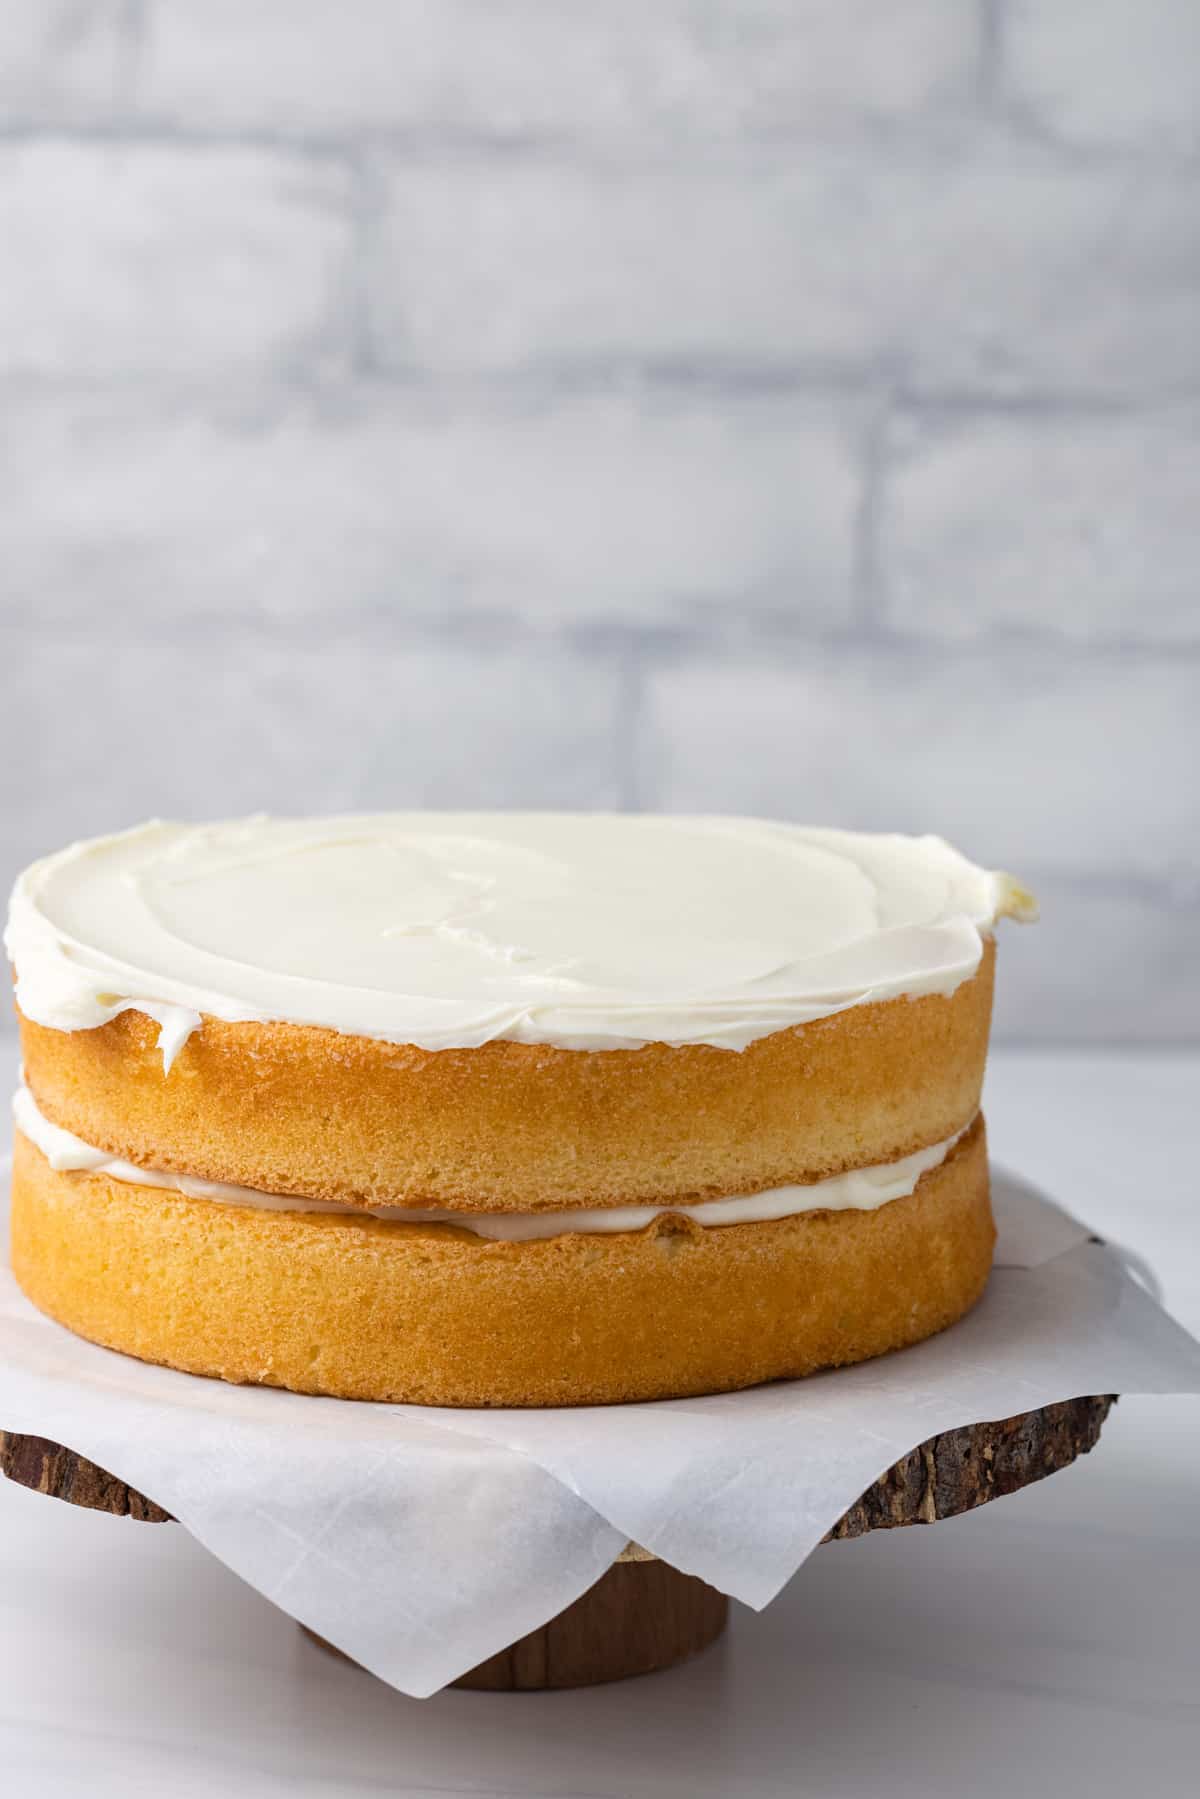 Two lemon cakes with lemon frosting between them